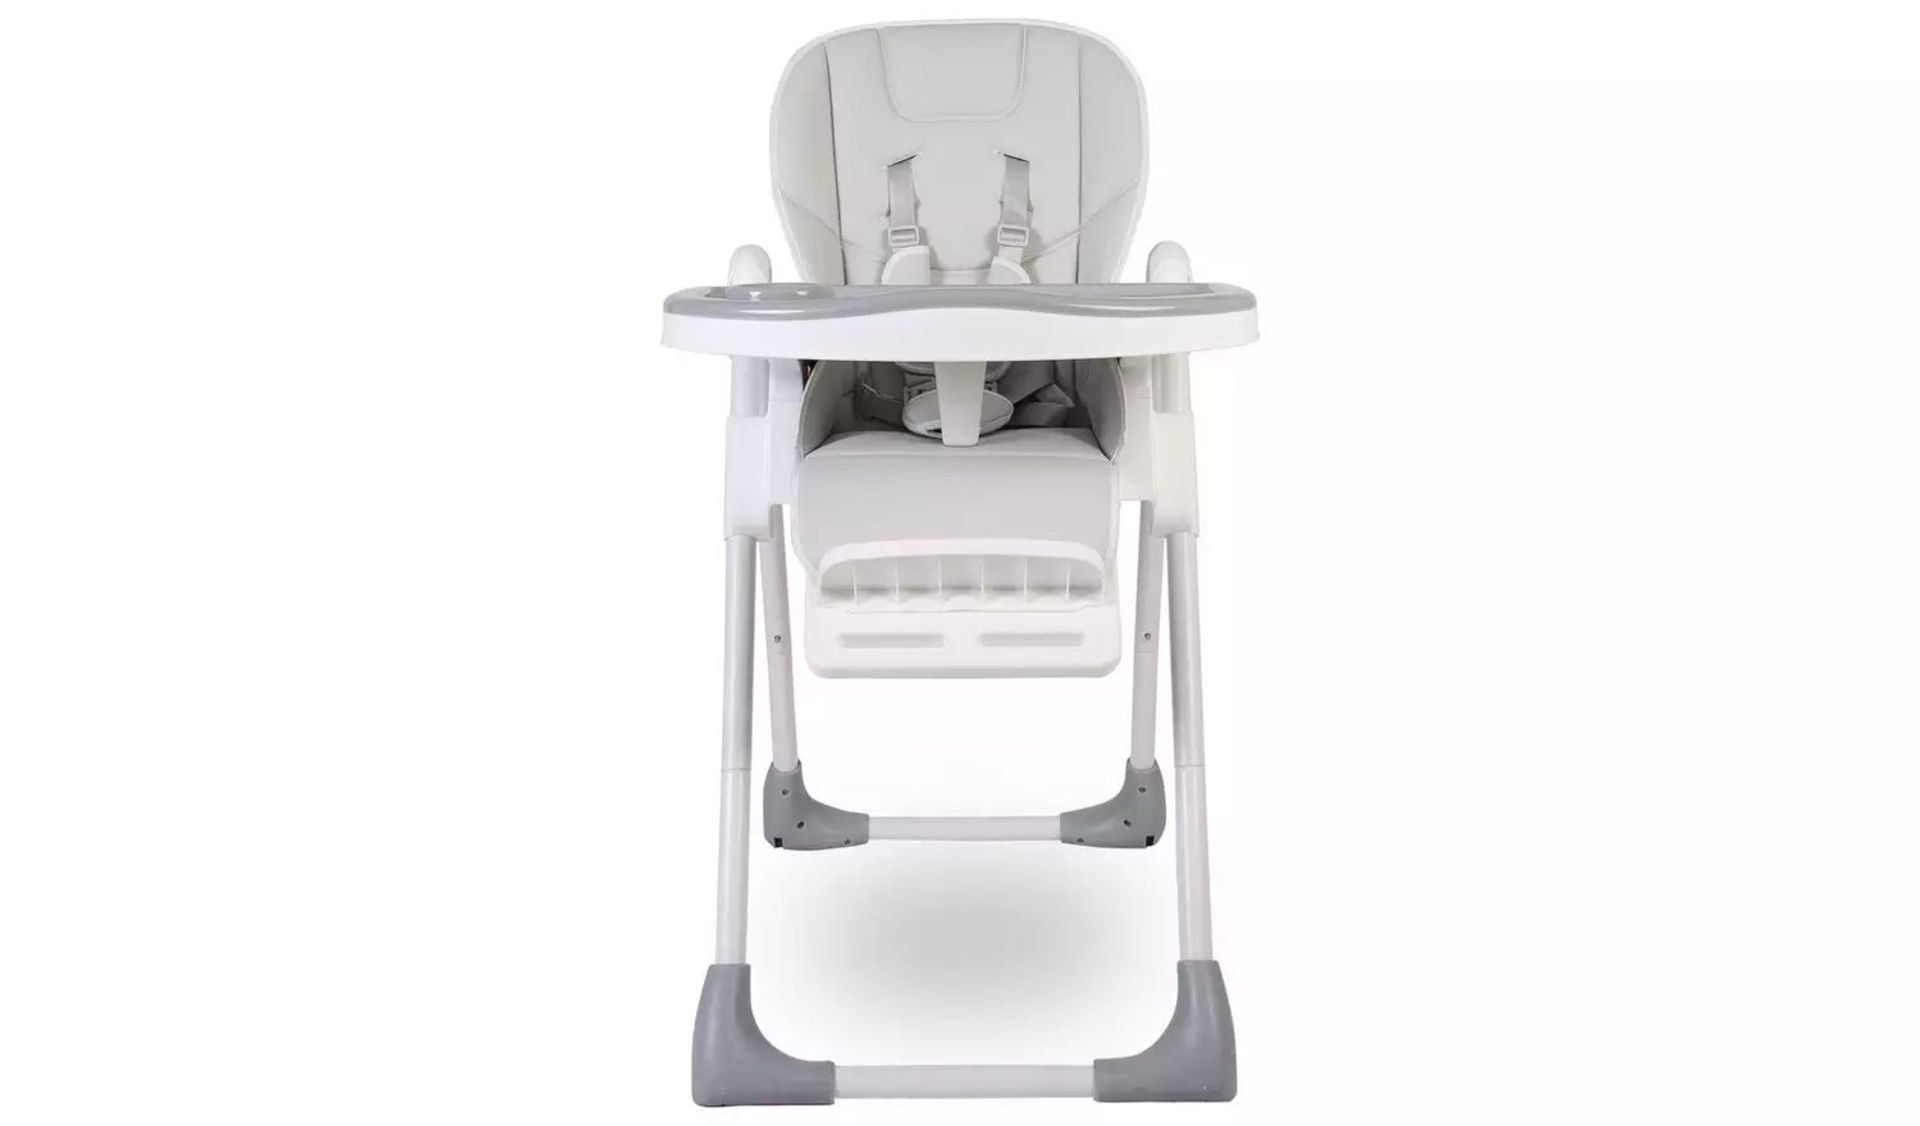 Red Kite Lolo Feedme Highchair. - ER53. The Feed Me Lolo is the ultimate hi-lo highchair that